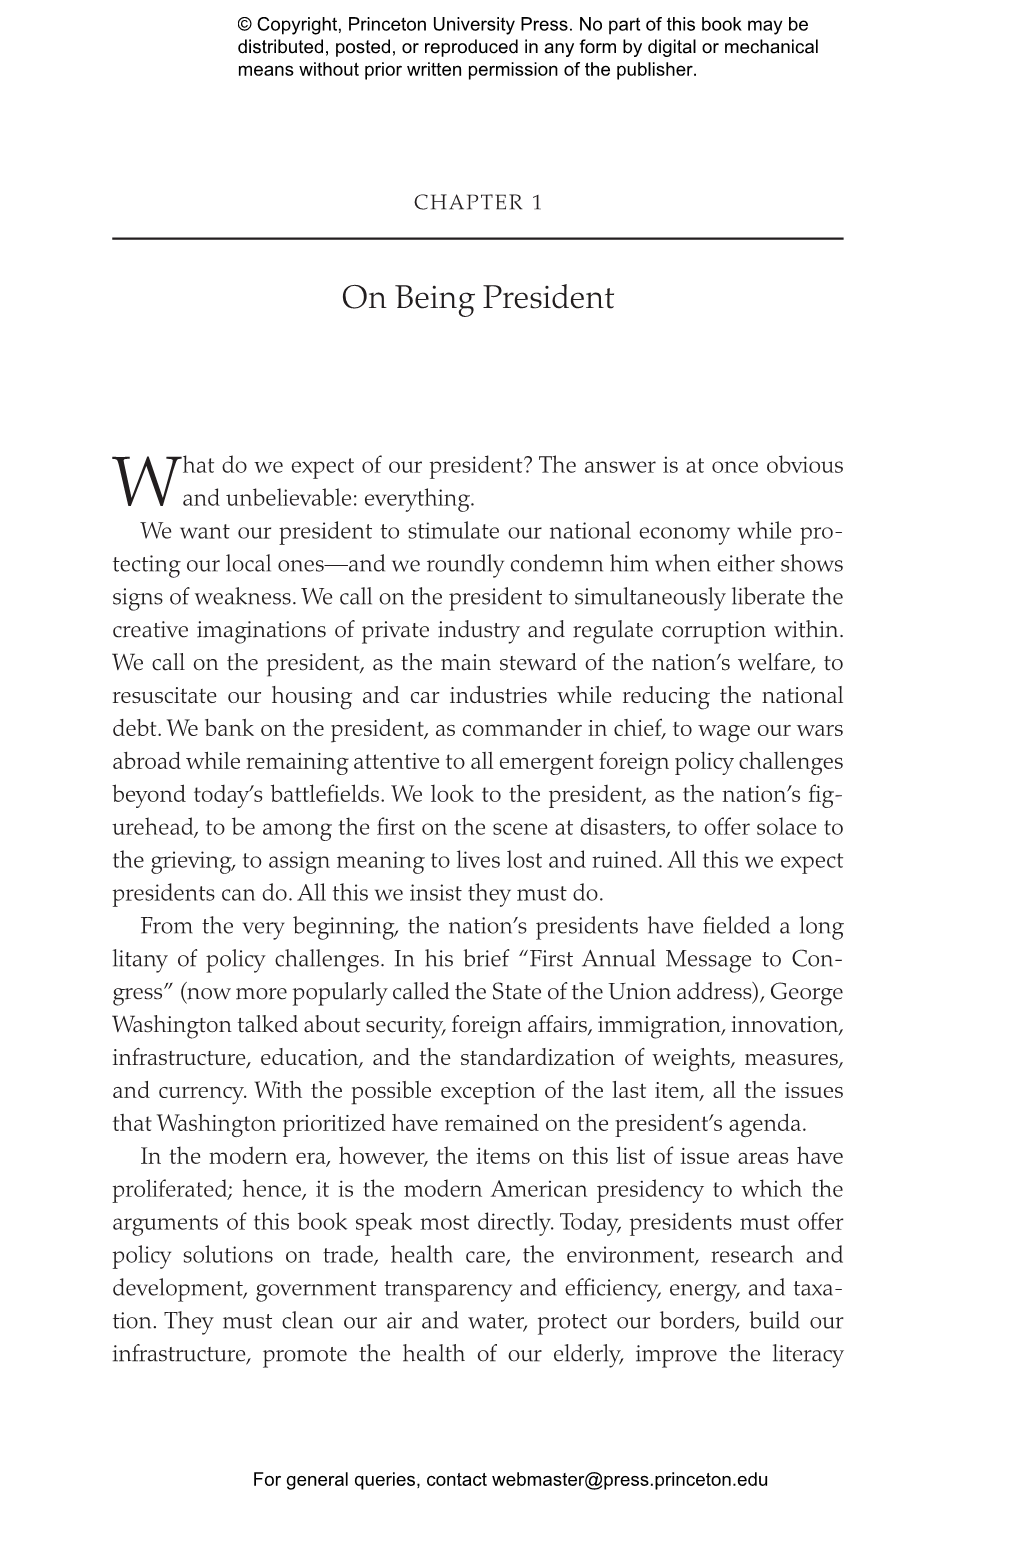 Thinking About the Presidency: the Primacy of Power